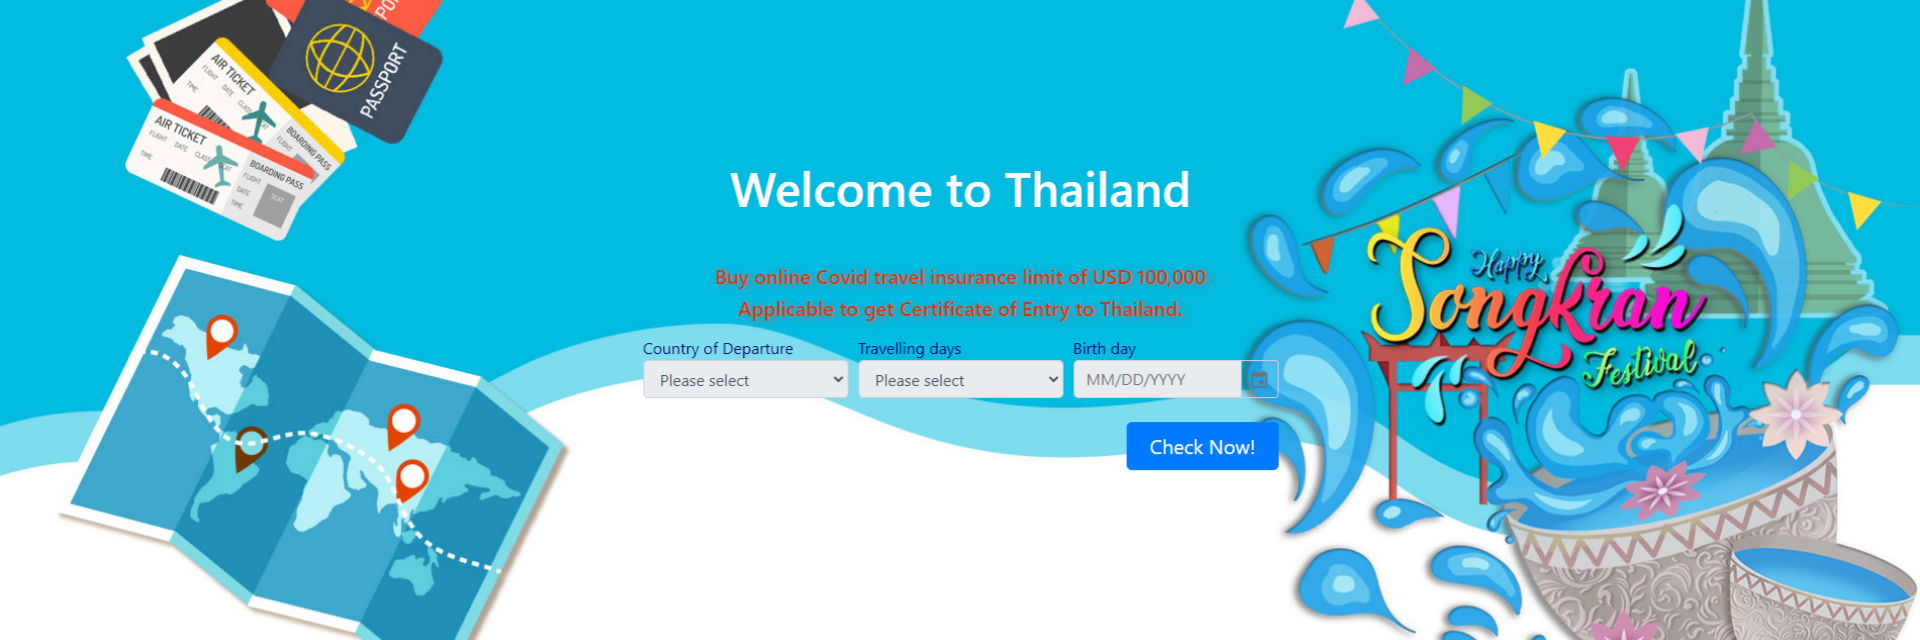 Introducing travel2thai.com / online Travel insurance to Thailand (USD 100,000 Covid 19 Coverage)